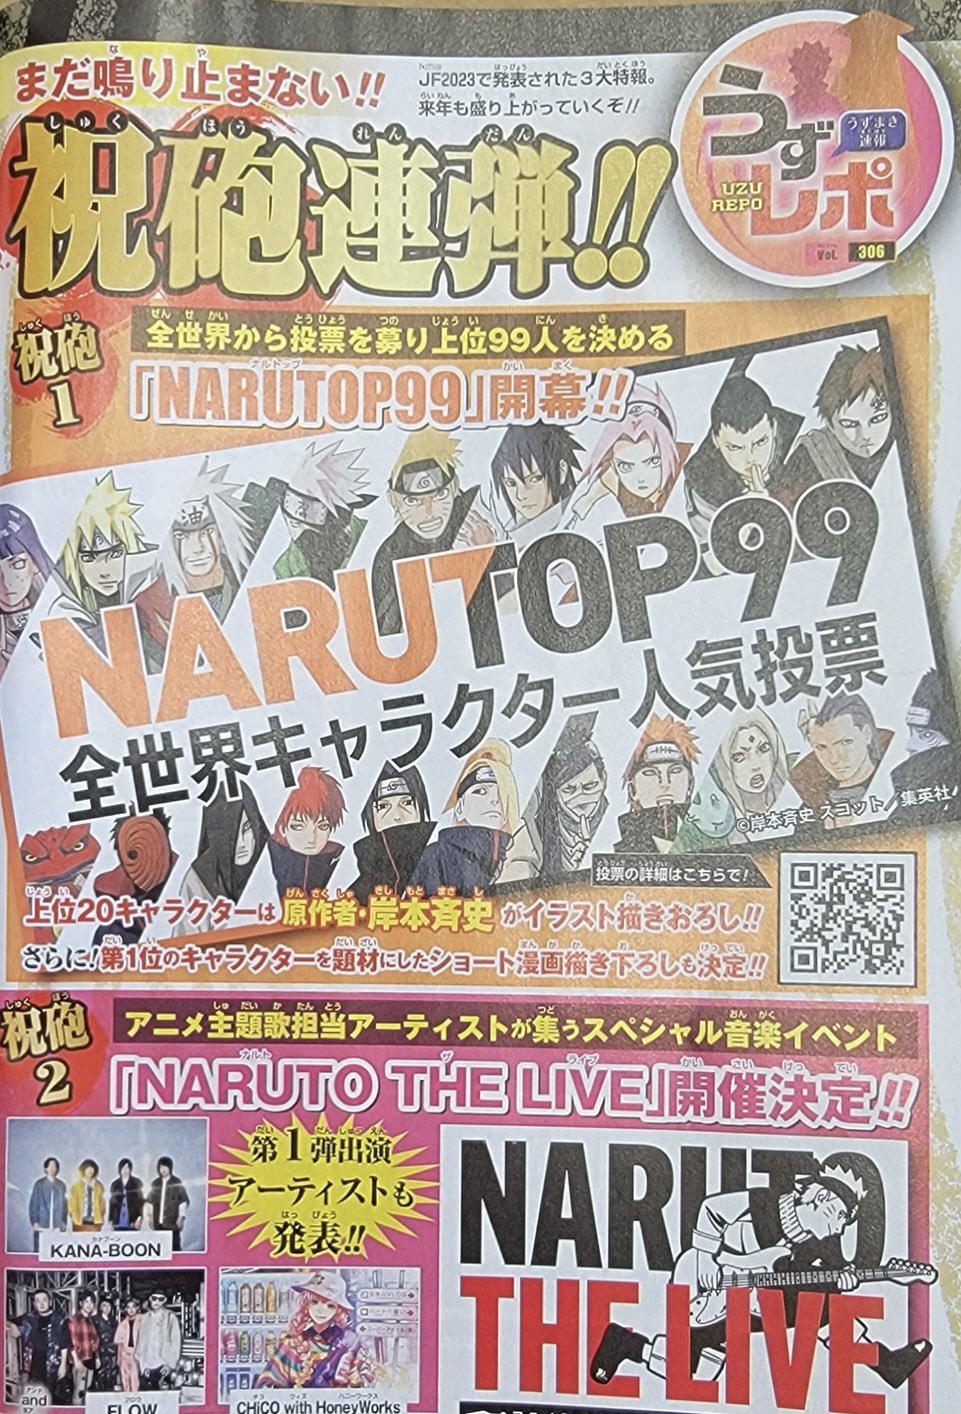 Abdul Zoldyck on X: According to a recent survey conducted by Shonen  Jump+, Boruto: Naruto Next Generations ranks No.5 as the most read/viewed  series on the MangaPlus app (August 2022). The top